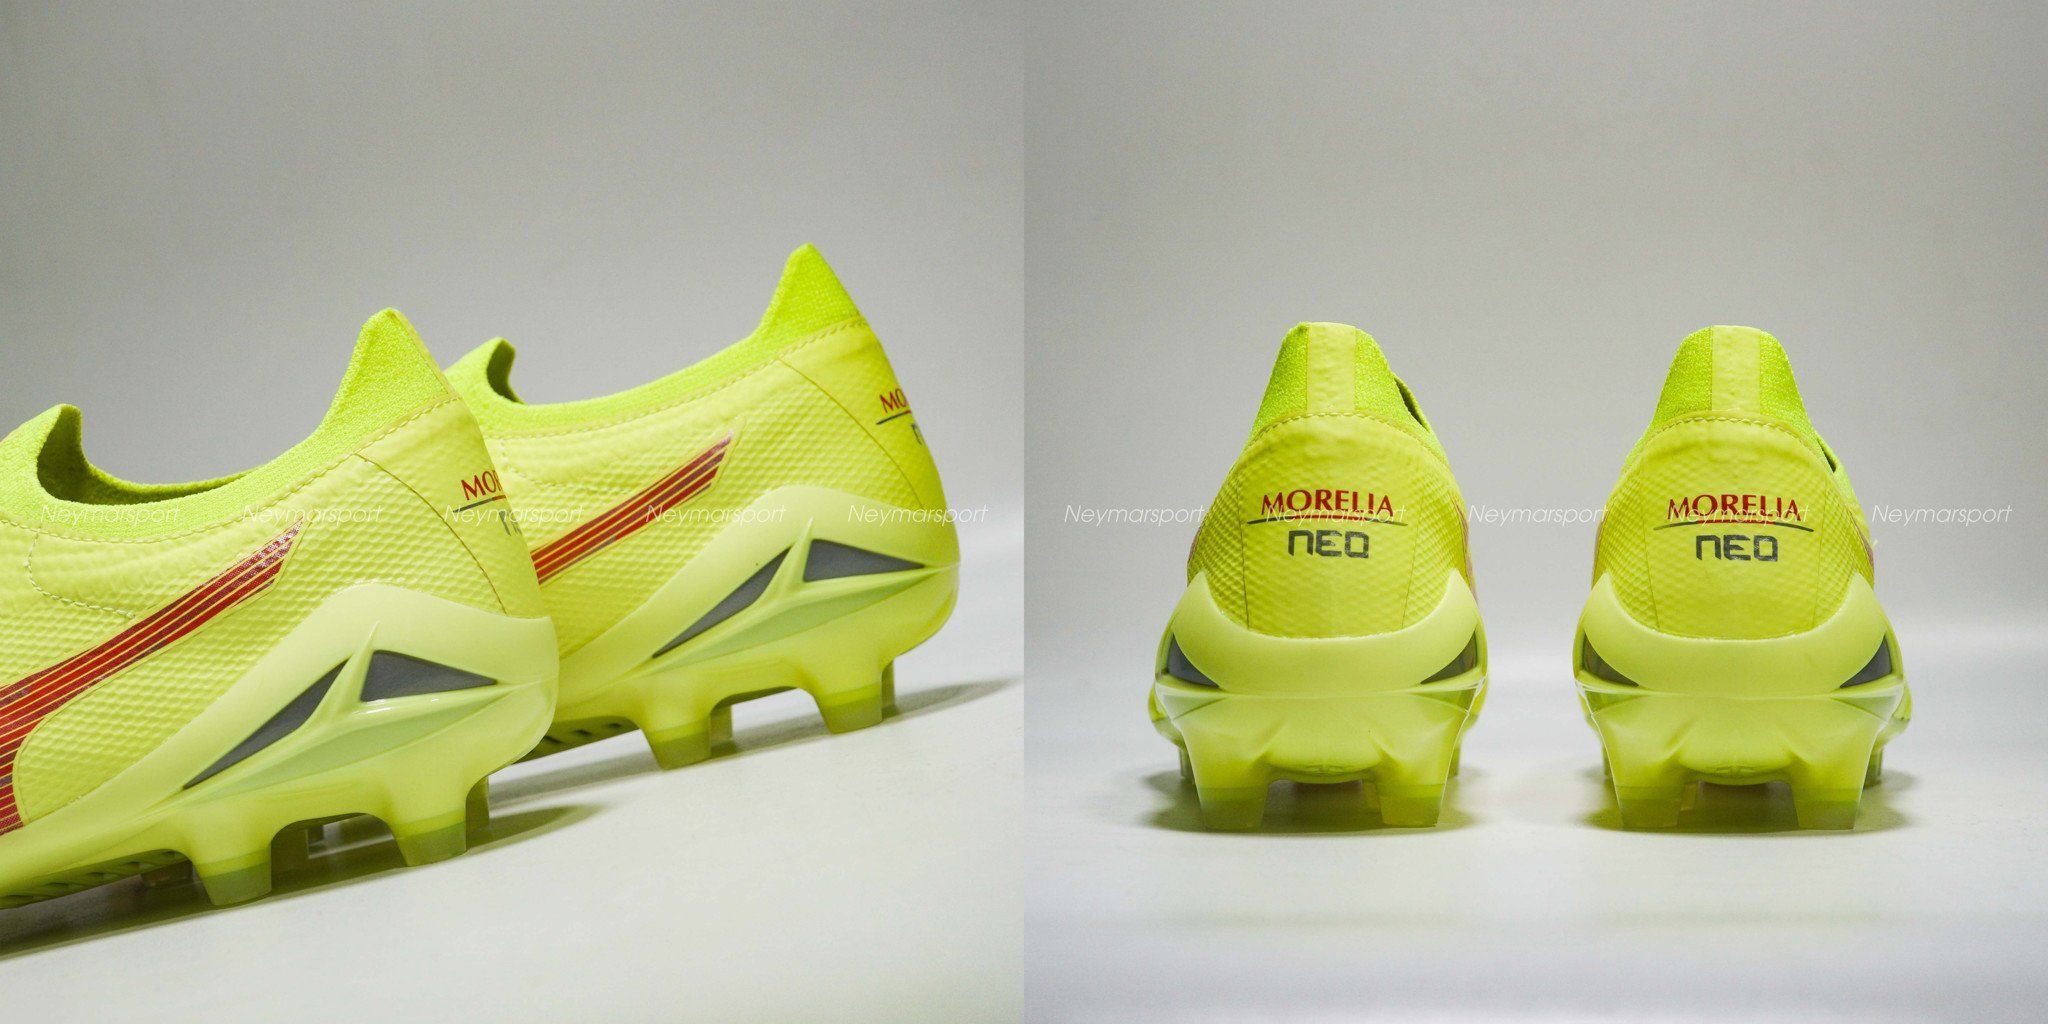 NUMBER 10, Neon yellow and fiery red accents - @mizunofootballofficial's  Dyna Pack is here. 🧨 Both the Morelia Neo IV and Morelia II are avail